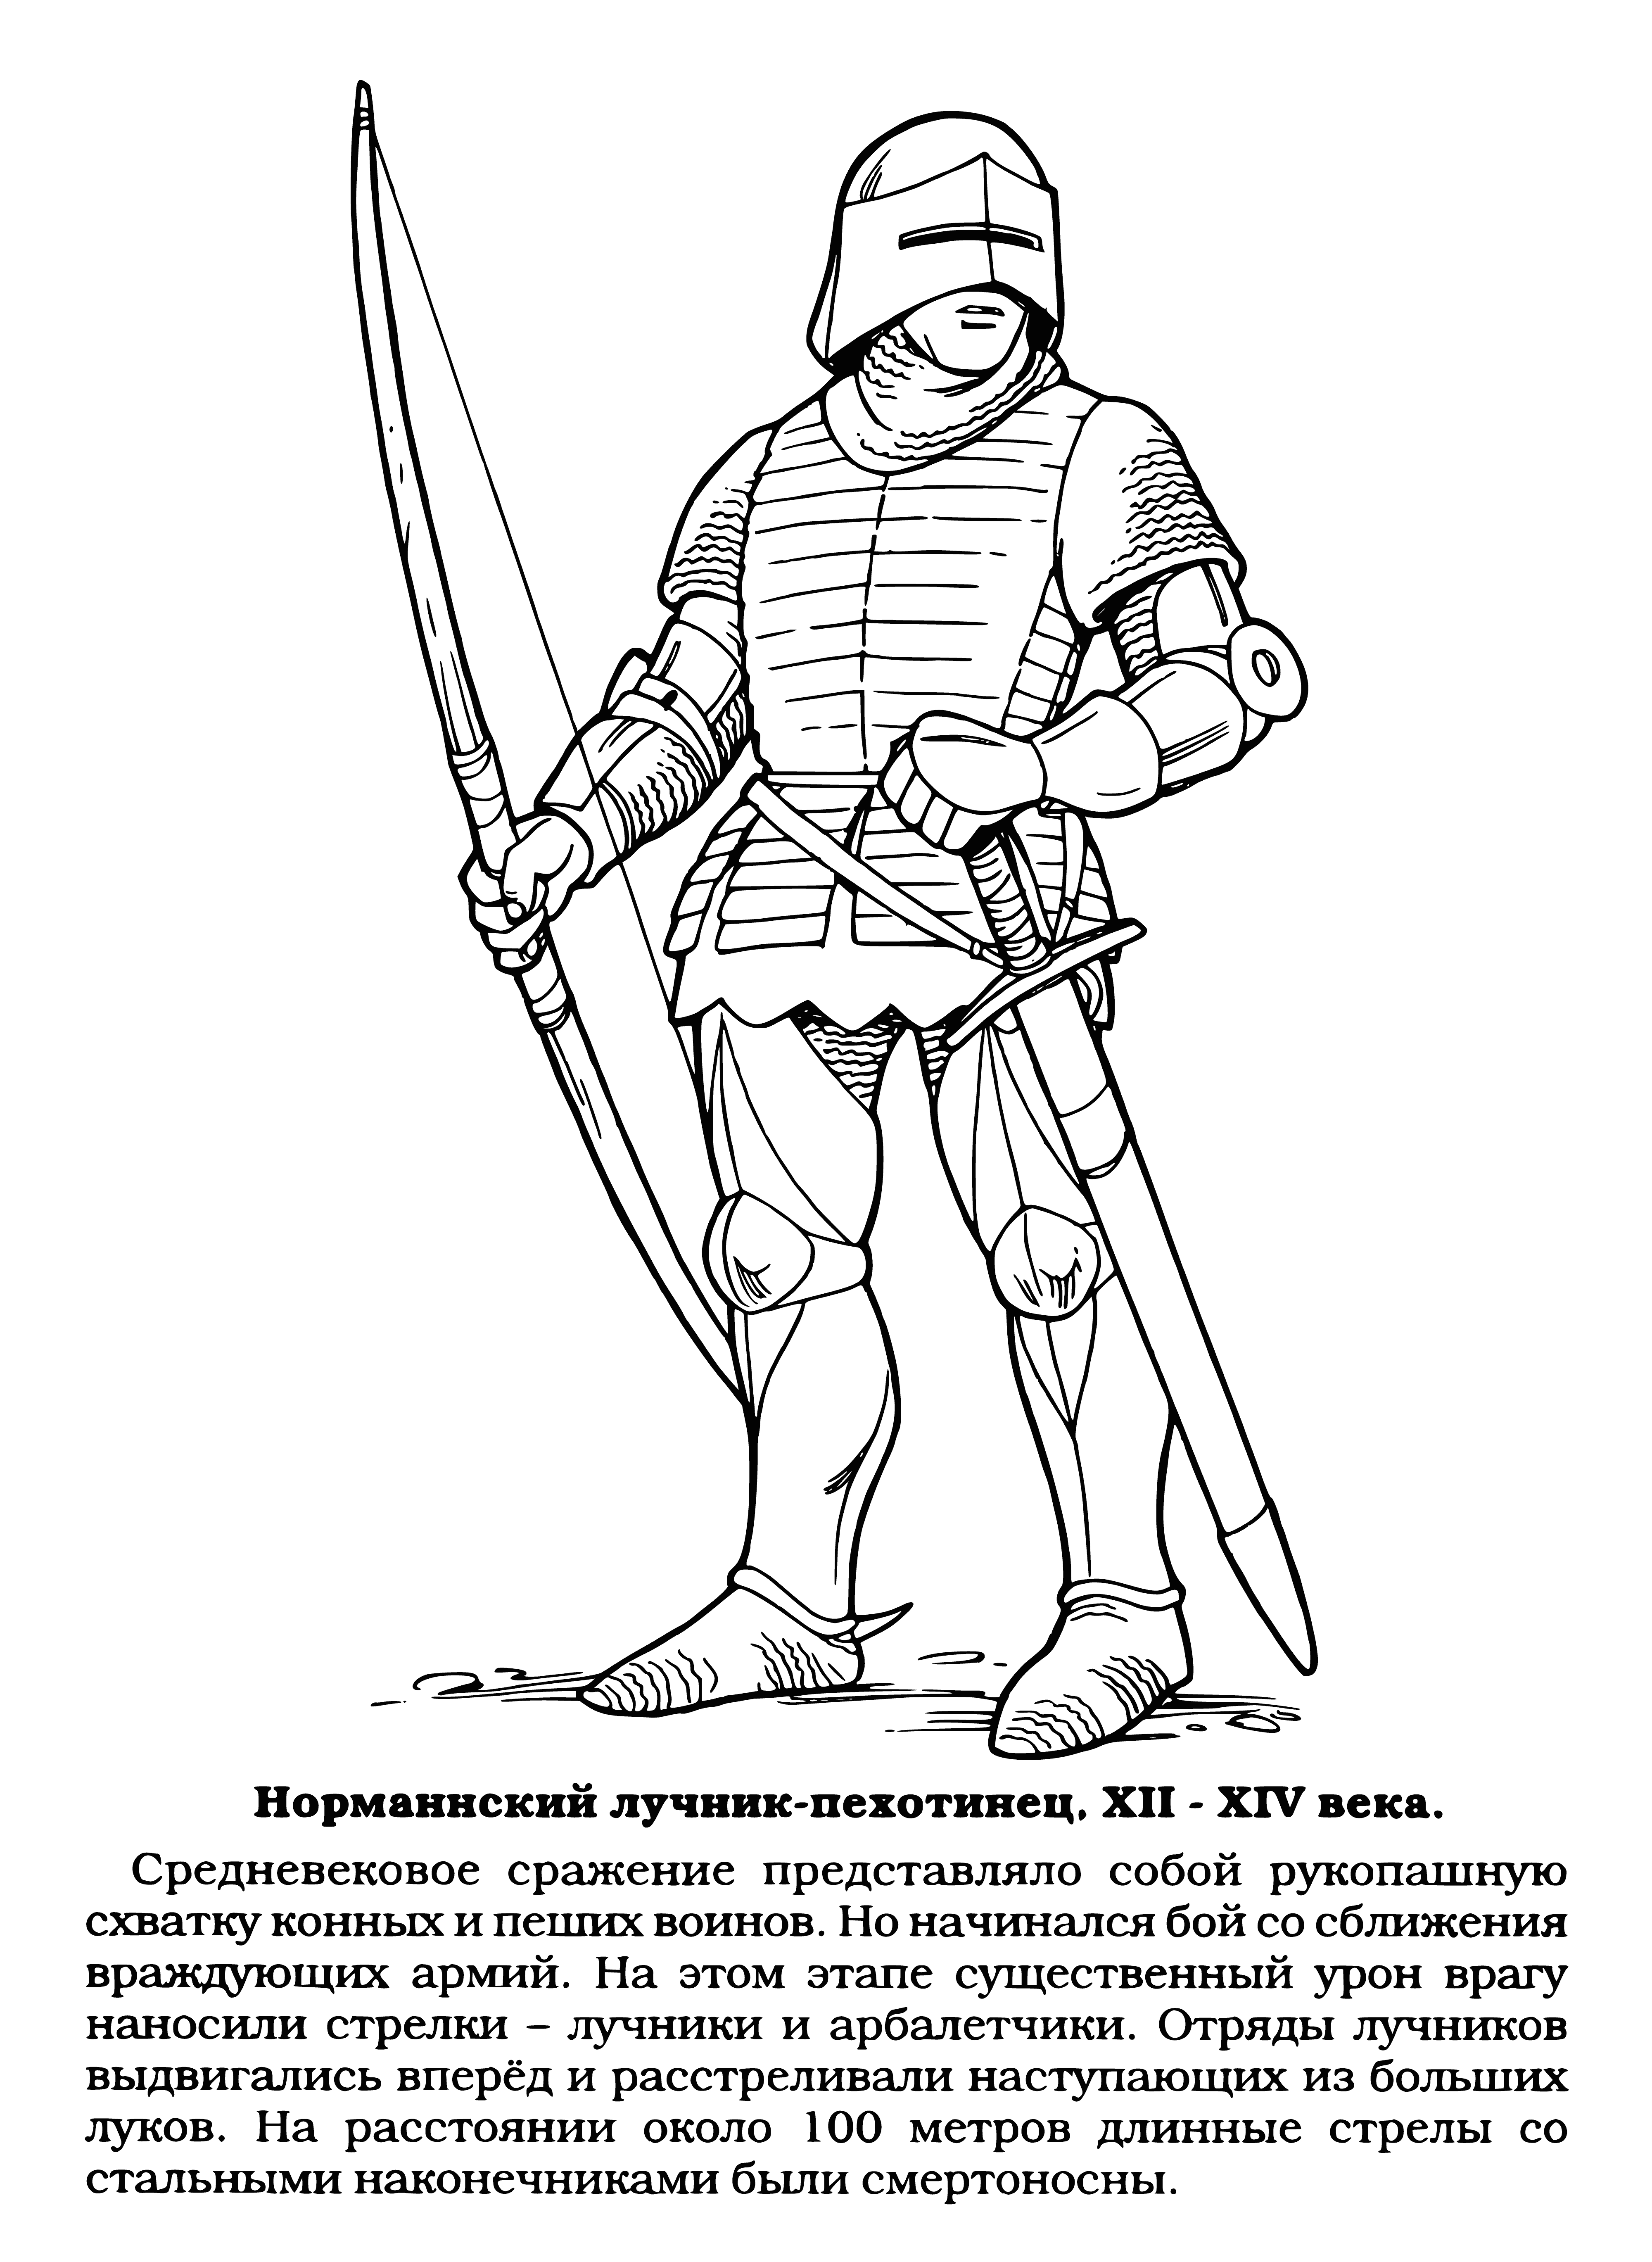 coloring page: Warriors, knights & soldiers all fight with armor & weapons - Norman archer on the left has helmet, bow & arrows; knight on the right has armor, sword & shield. Ready to fight!